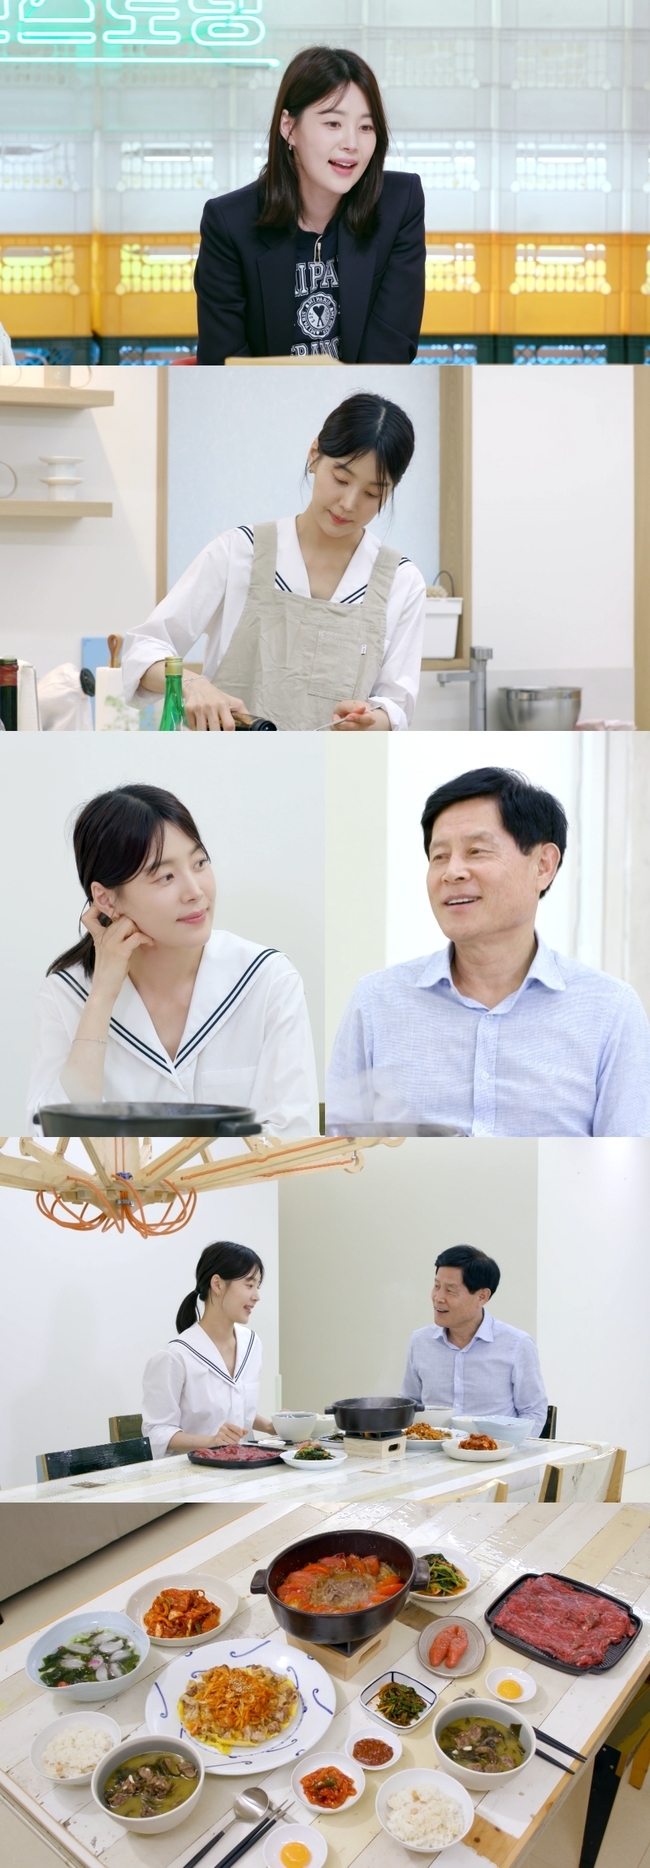  ⁇ StarsStars Top Recipe at Fun-Staurant  Han Ji-hye Father thanks daughterKBS 2TV Stars Top Recipe at Fun-Staurant, which is broadcasted at 5 pm on September 29, reveals the heartwarming story of Han Ji-hye and Father.Han Ji-hye, daughter of yun-seul, and Han Ji-hye, daughter of Han Ji-hye, who have been born and counted a little bit of their parents hearts, are expected to give a heartwarming impression to viewers.In the VCR, Han Ji-hye invited Father to the house. Father, who brought food full of both hands to meet his daughter and granddaughter, challenged cooking for his daughter Han Ji-hye for the first time in his life.Han Ji-hye also surprised me by making bulgogi, meatballs, and other feast foods for my father while yun-seul was sleeping.Han Ji-hye and his father had a meaningful meal together. Han Ji-hye seemed to have never spent so much time alone with his father.Father was always with his family, because he never met alone. So it was a little awkward, and he gave a frank smile. A day when two people got closer through food for each other.The two of them shared a lot of stories for the first time with a meaningful meal of their own.Han Ji-hye Father, who tasted her daughters cooking, said, My daughter is good at cooking, and she is good at cooking. She continued to praise her daughter as a foolish father.When I was a child, I was a thankful daughter who always told me that she would be good for her mother and father. She continued to boast about her daughter who had been broken since childhood and laughed.Han Ji-hye Father told her daughter, who is tired of childcare these days, that she should not take everything to yun-seul, but take care of her first.Han Ji-hye shared her daily life with her husband, who spent a lot of time watching yun-seul.